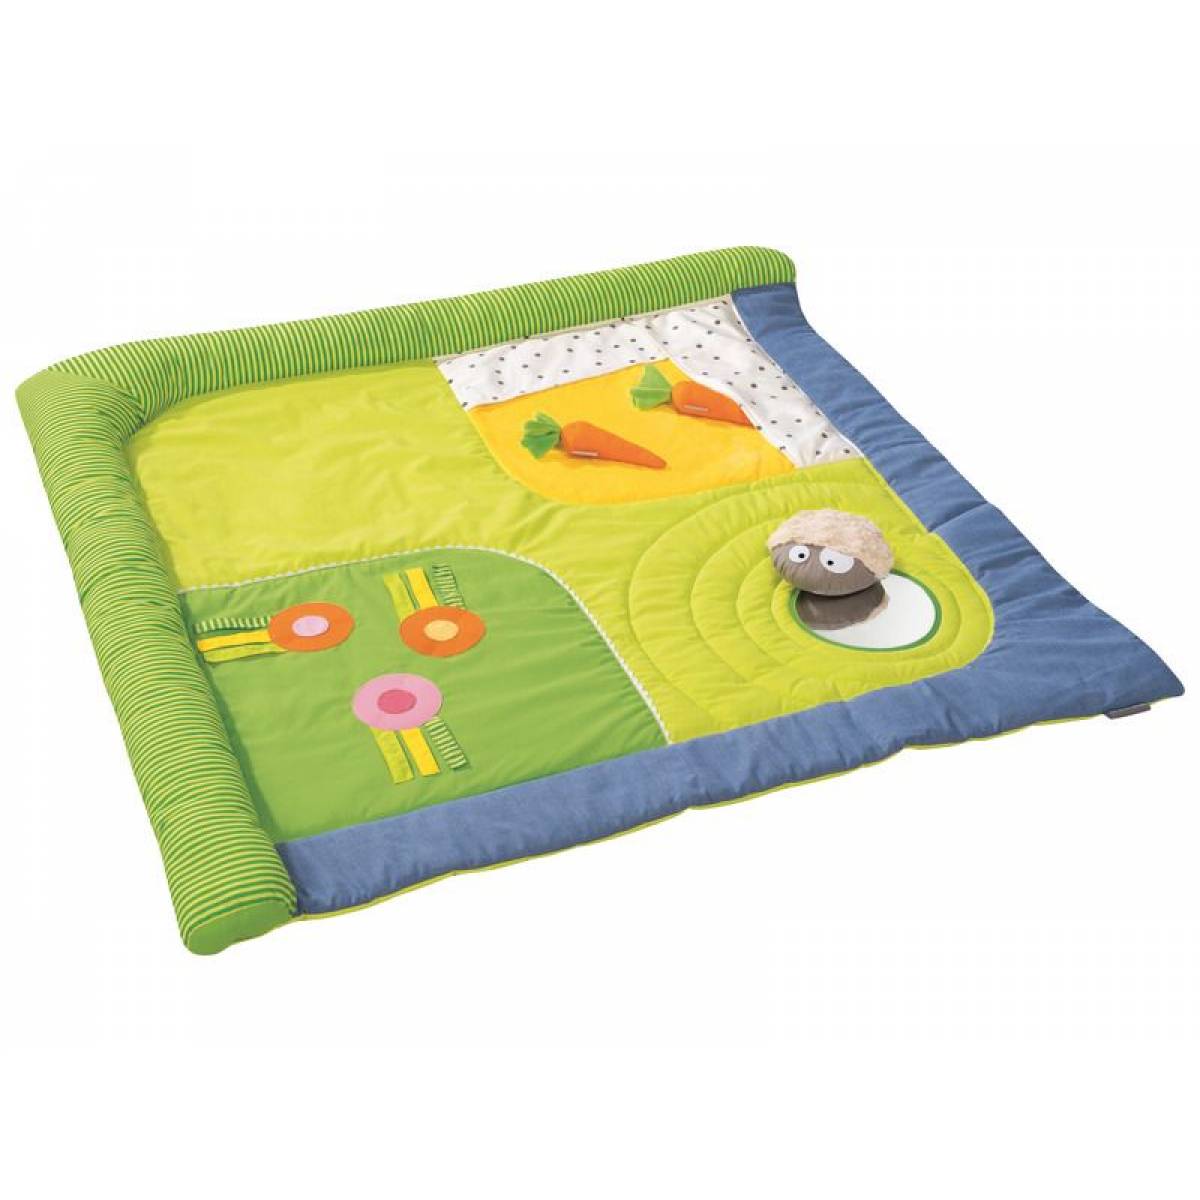 3D Activity Mats - The Countryside and 3 comforters